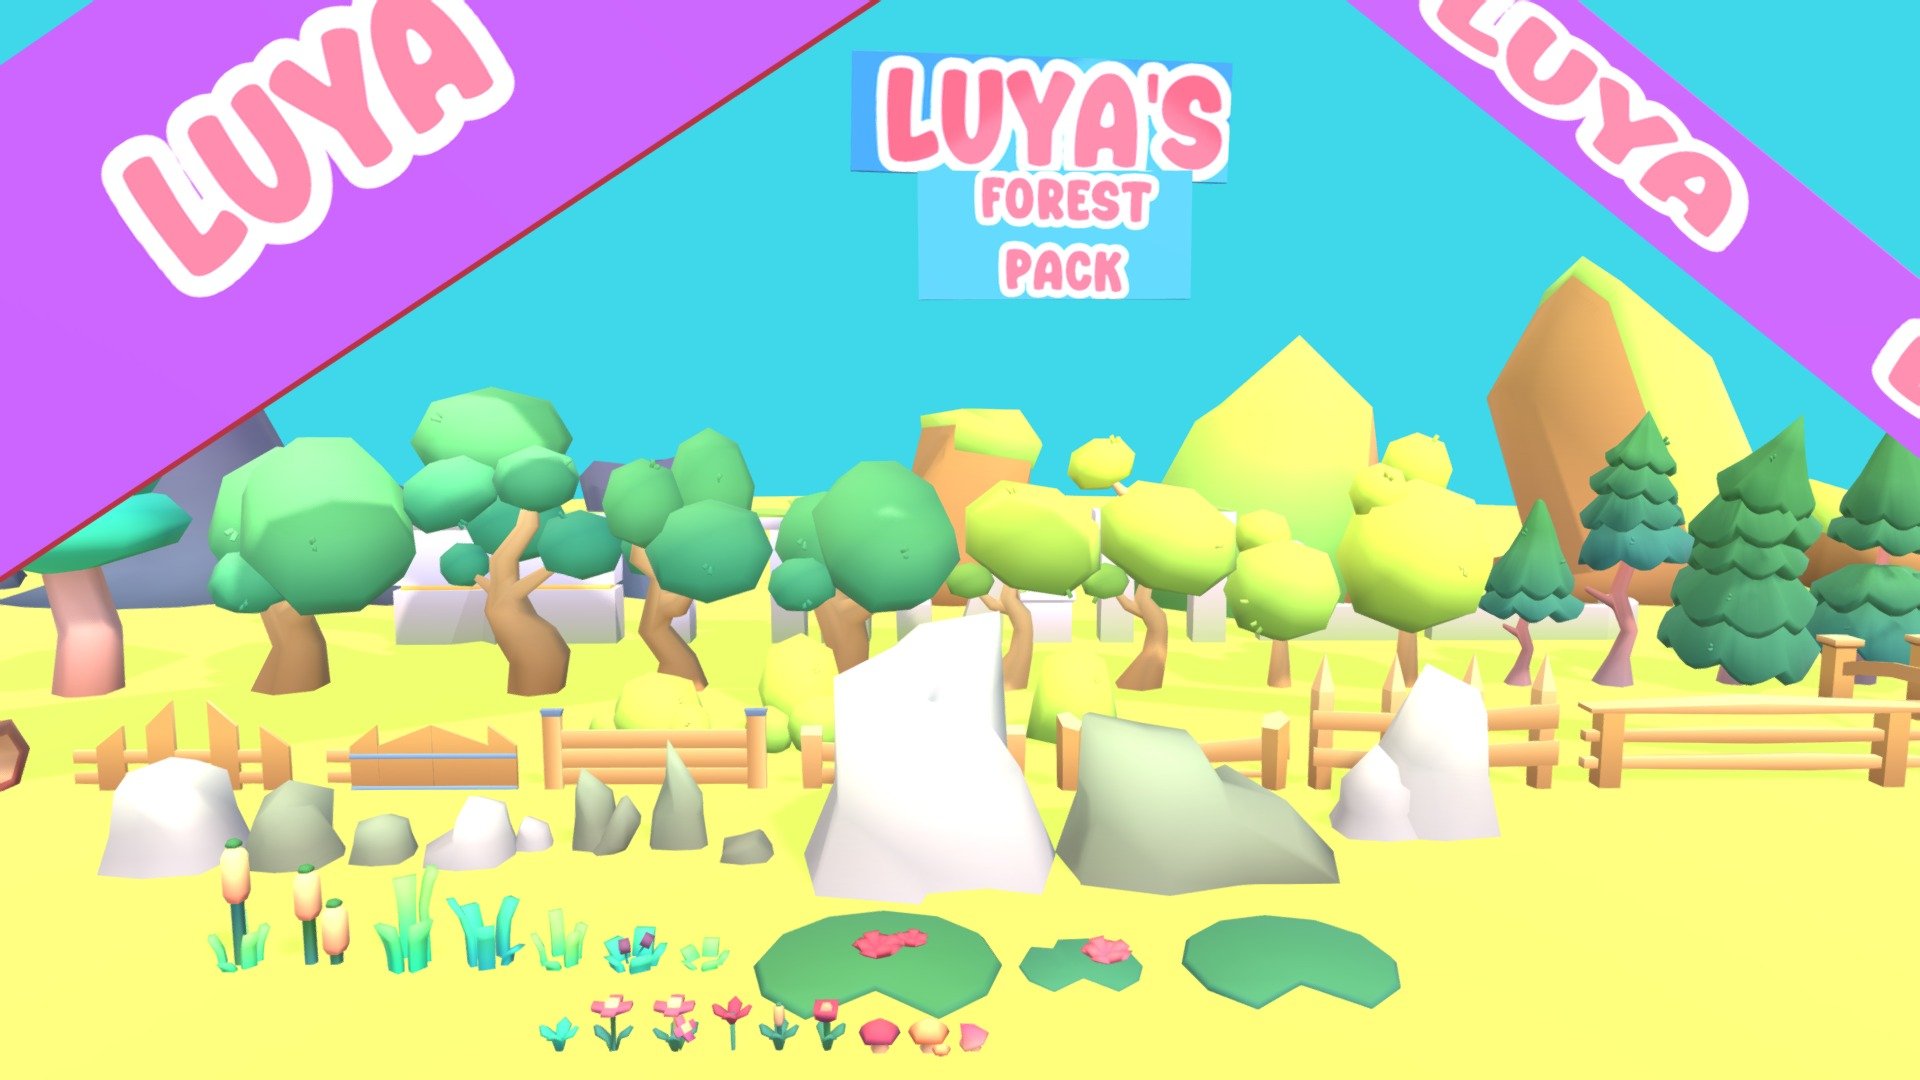 The full version of Luya's forest pack has +70 assets including amodular temple set! If you didnt know what style your next simulator, tycoon and clicker game will have, now you know: GET this high quality forest pack to start with your first biome! 

CONTENT:




14 Trees

10 River Plants

10 Flowers

10 Rocks

9 Temple

7 Fences

4 Bushes

4 Logs

3 Bridges

Really hope this pack can help you to get your map the way you envisioned! 🌺
Keep a look on Luya's X/Twitter profile below for the next FREE and BONUS packs! What do you think it's gonna be? 

CC Custom: You can share, remix, make money using the assets, but you cant re-sell them!

Luya, turn your cartoon imagination into reality! 🌺 - 🌳 Luya's FULL Forest Pack! - 3D model by LUYA Store 🌺 (@luyas) 3d model